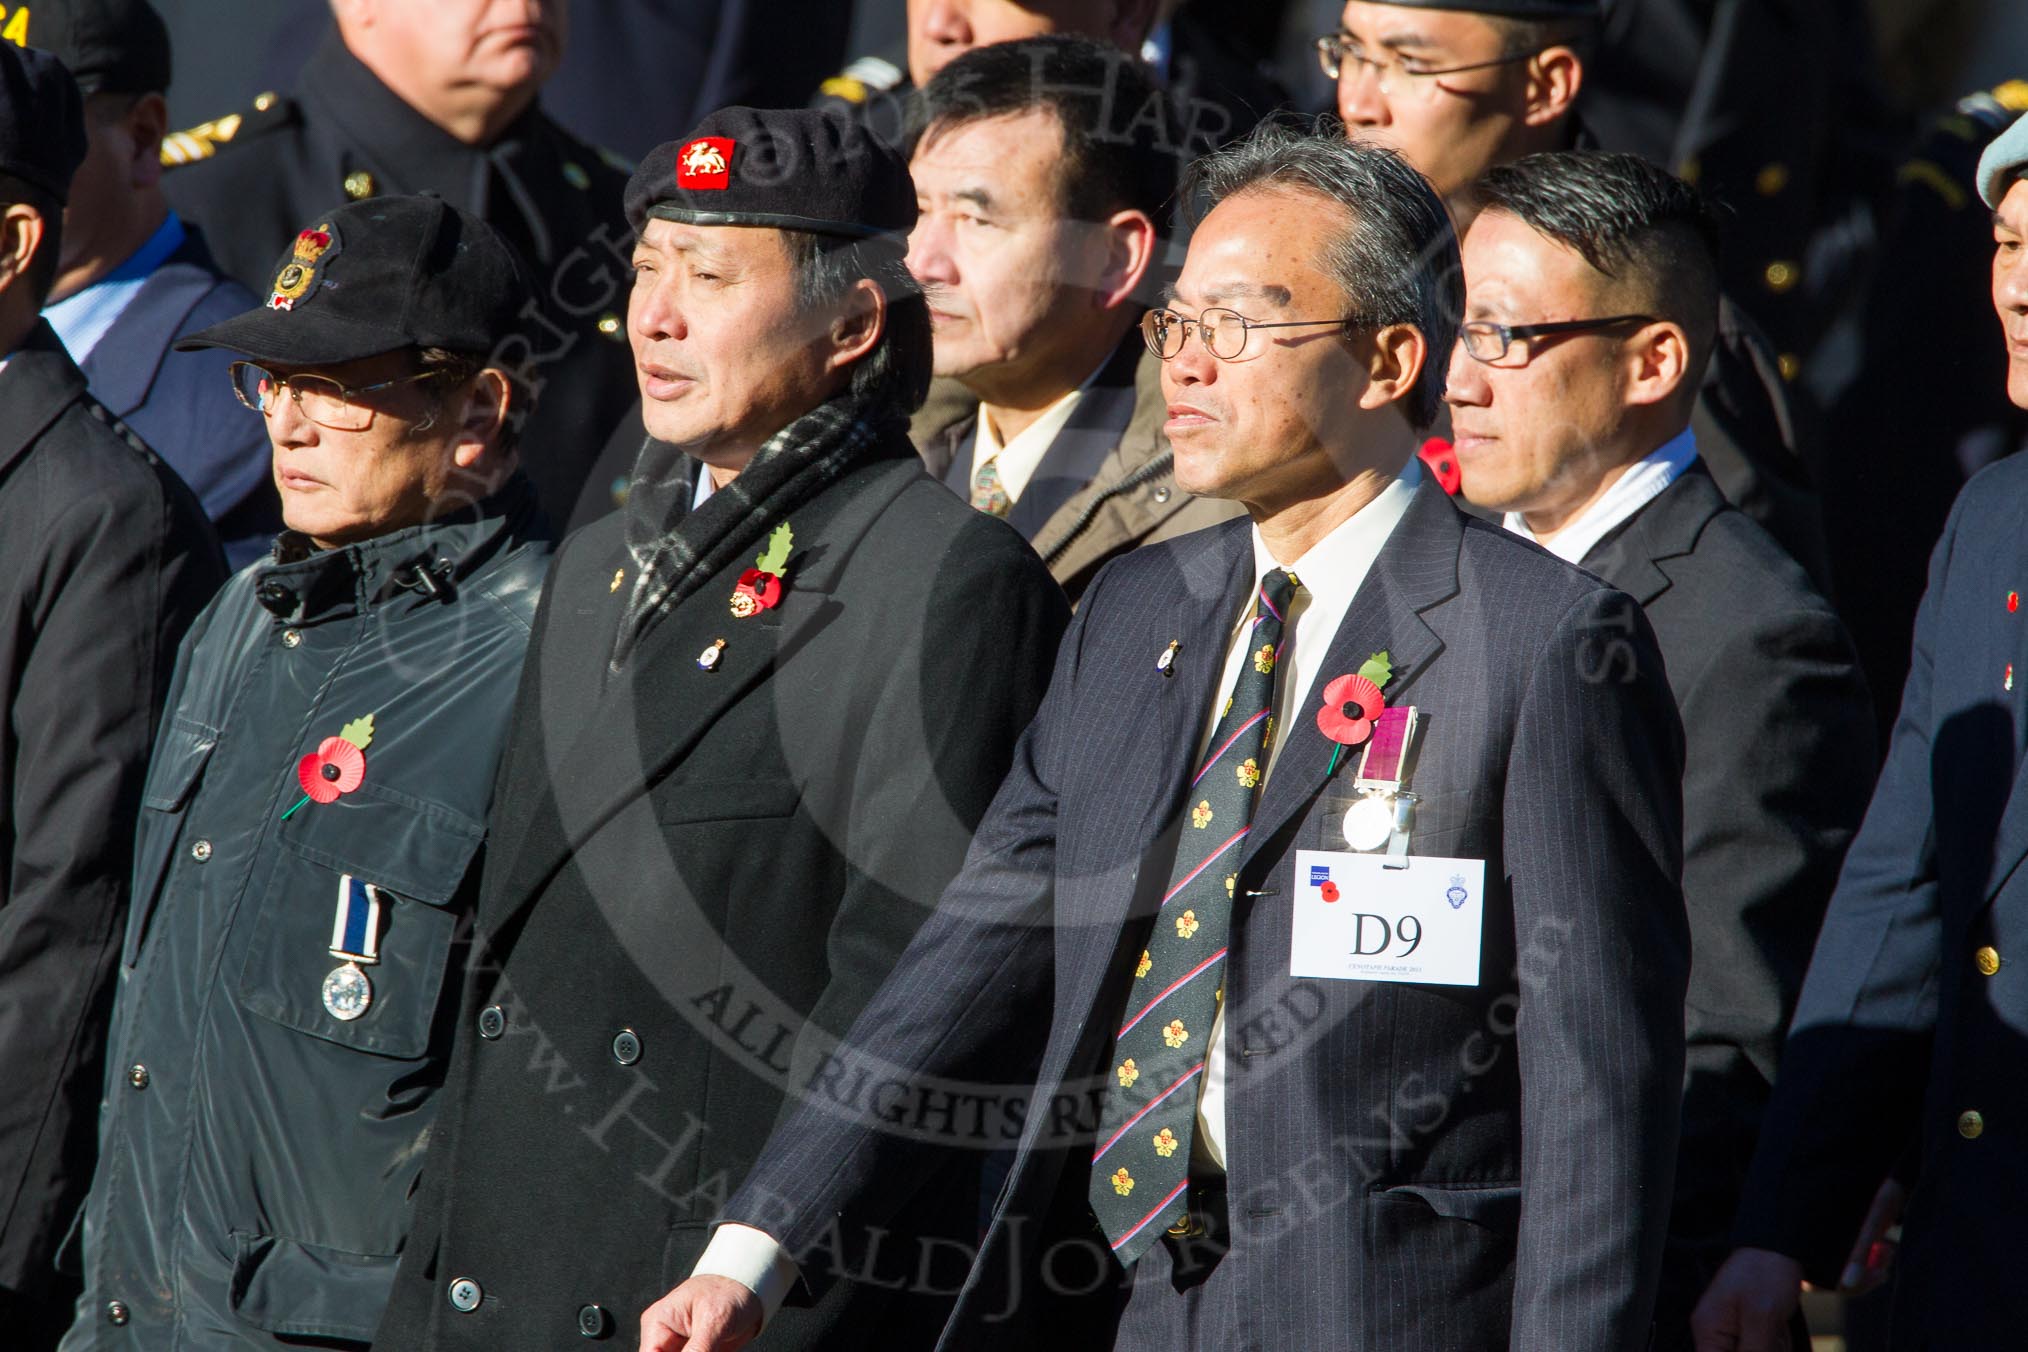 Remembrance Sunday Cenotaph March Past 2013: D9 - Hong Kong Ex-Servicemen's Association (UK Branch)..
Press stand opposite the Foreign Office building, Whitehall, London SW1,
London,
Greater London,
United Kingdom,
on 10 November 2013 at 11:39, image #77